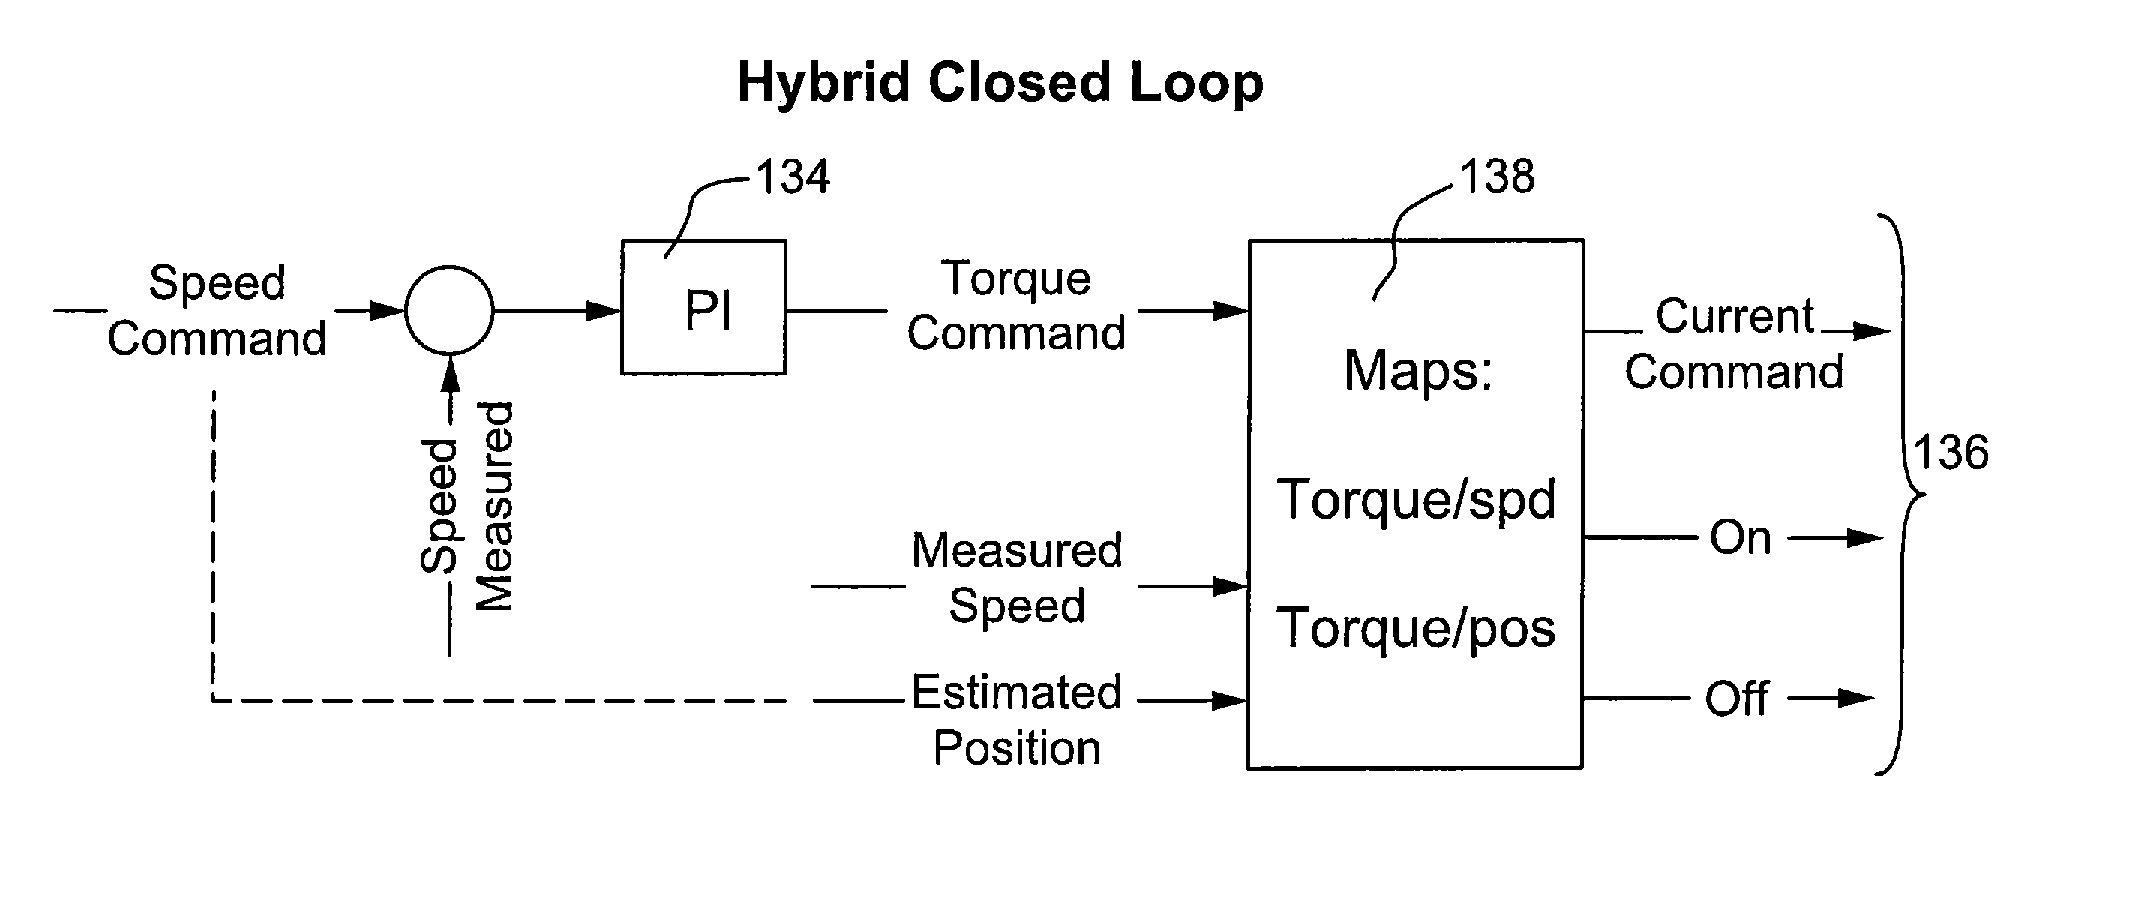 Hybrid closed loop speed control using open look position for electrical machines controls